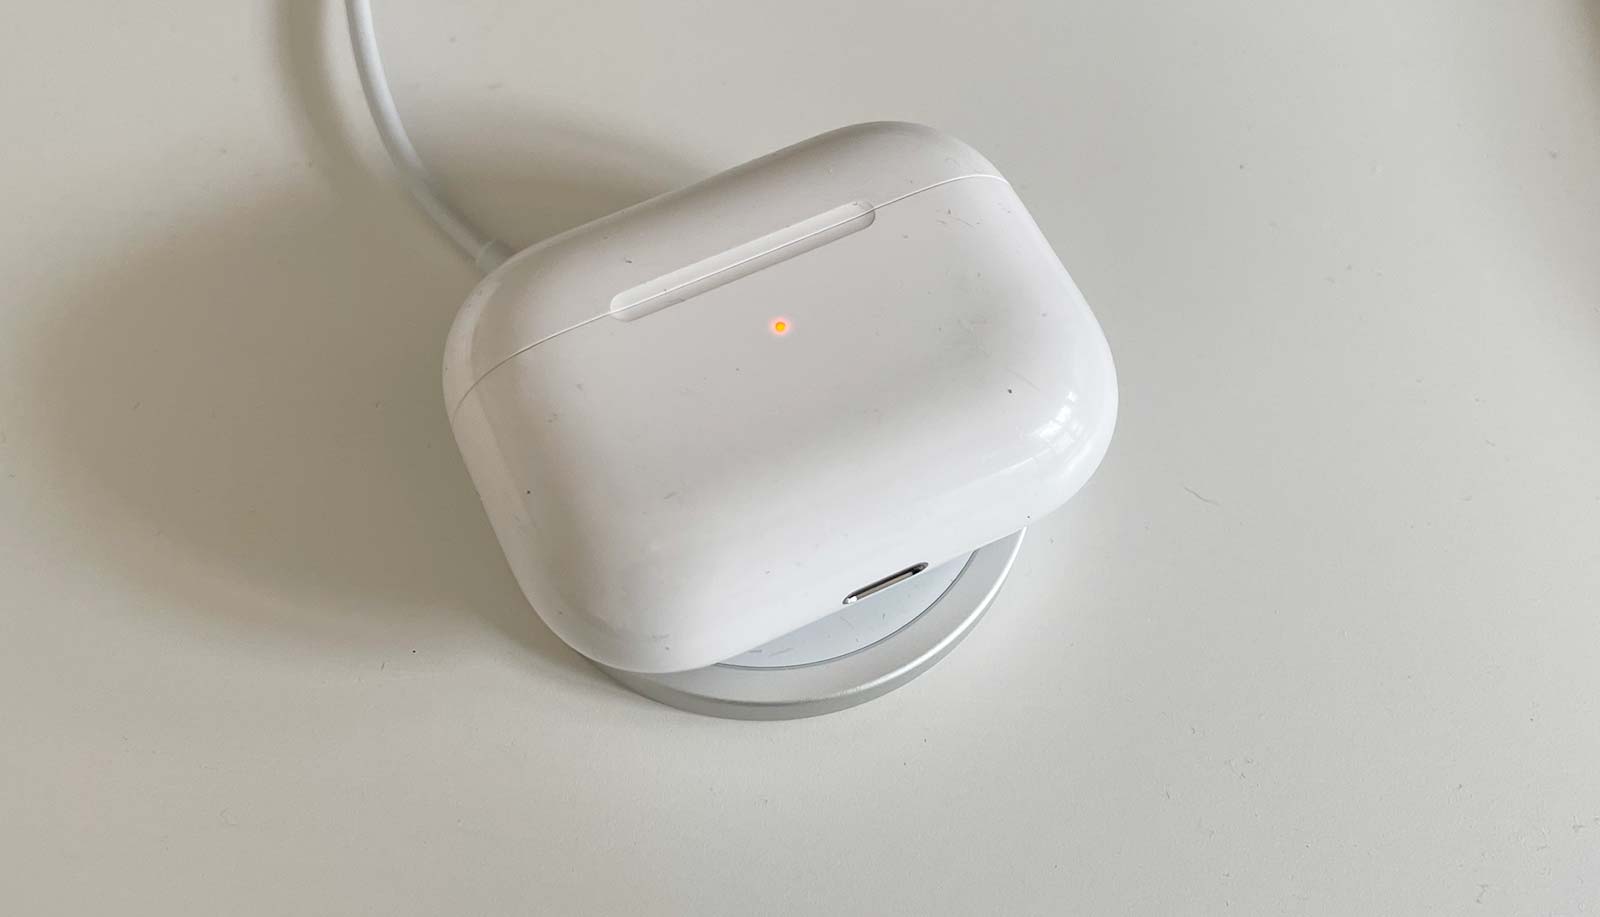 Apple AirPods Pro on a MagSafe charger